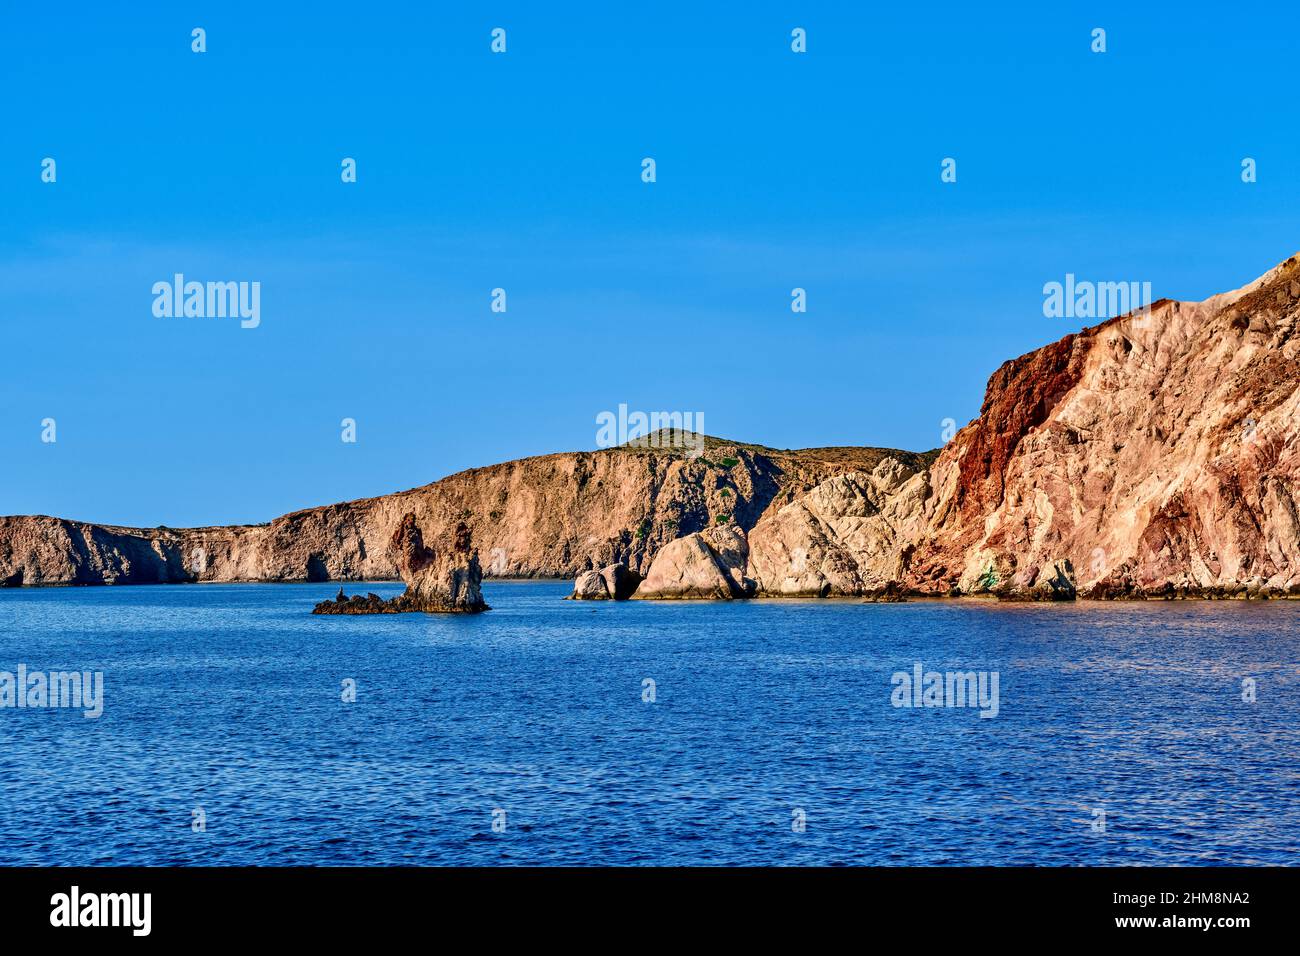 Beautiful view of hill slope of island in Mediterranean Sea. Blue waters, clear blue sky, bright sunshine, summer day, rocks and islets Stock Photo